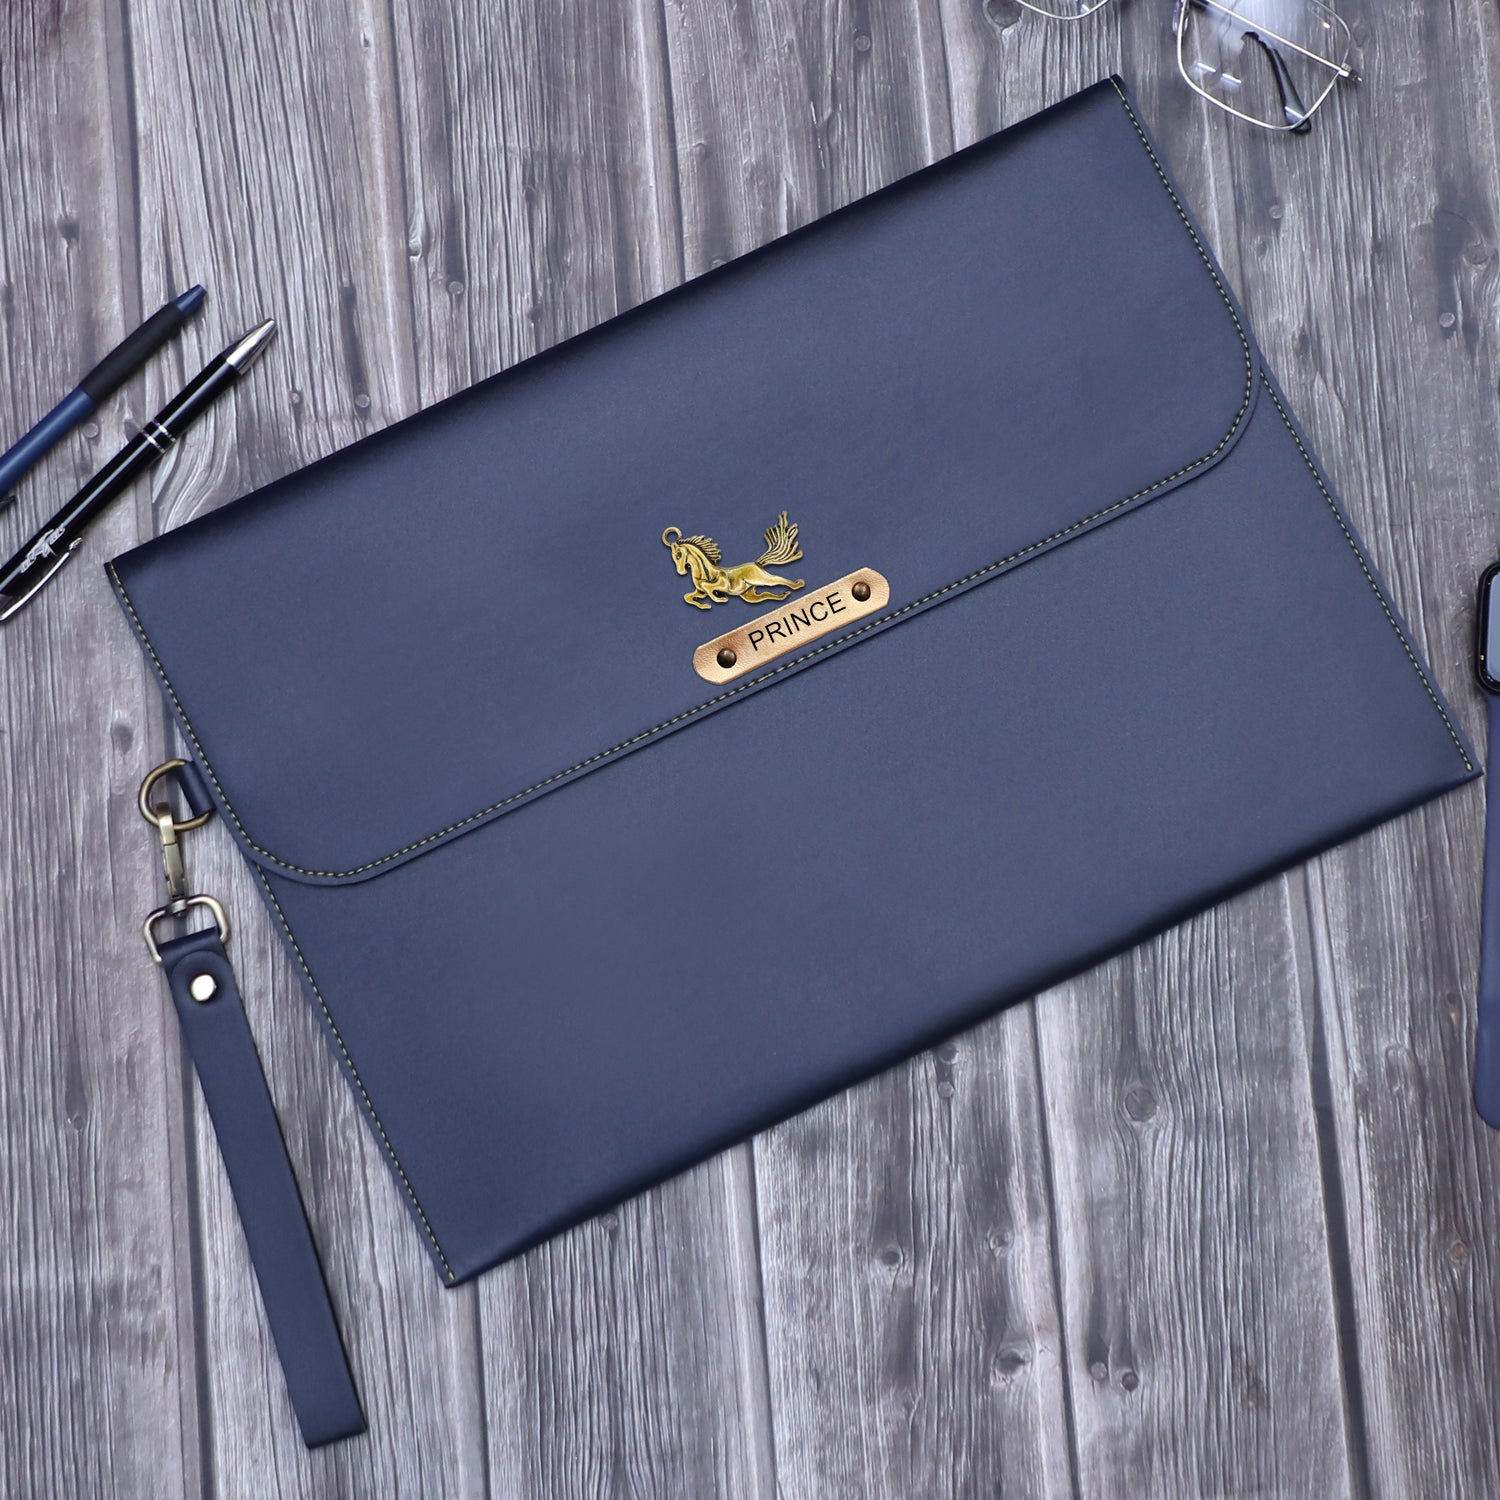 Personalized Laptop Sleeve With Name & Charm - Blue